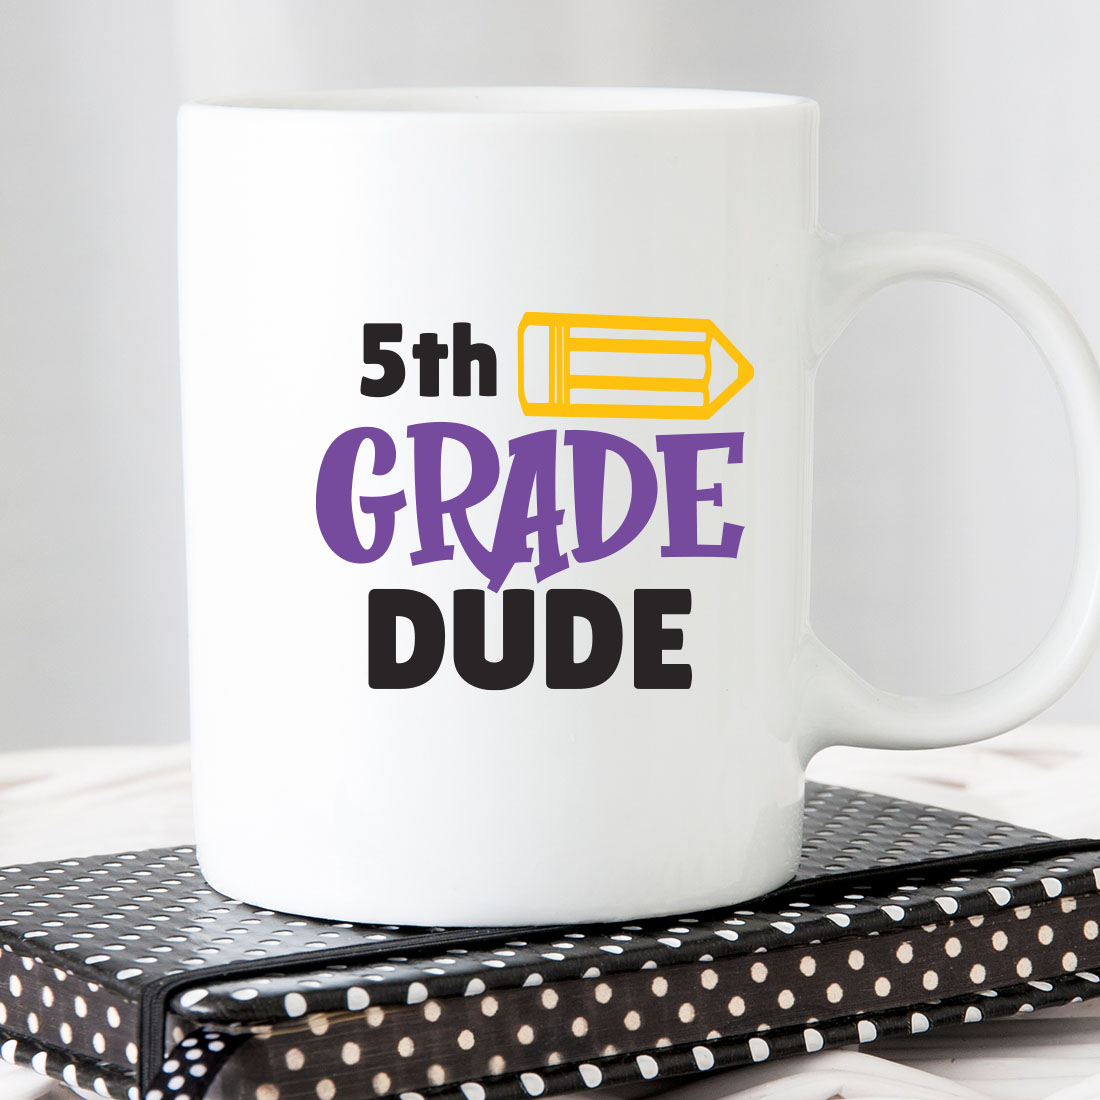 White coffee mug with the words 5th grade dude on it.